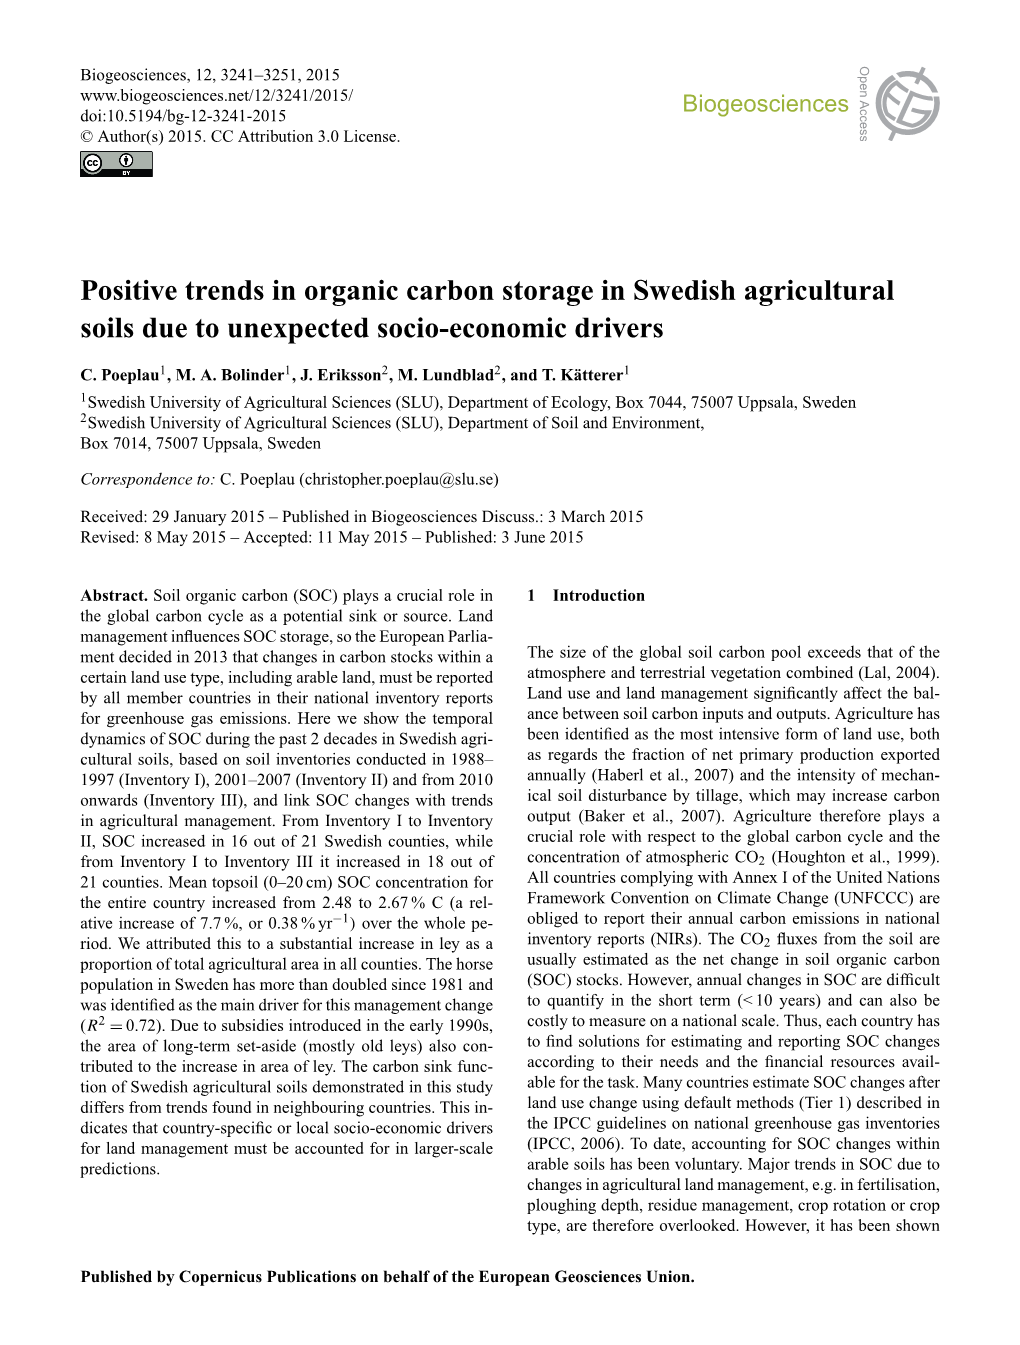 Positive Trends in Organic Carbon Storage in Swedish Agricultural Soils Due to Unexpected Socio-Economic Drivers